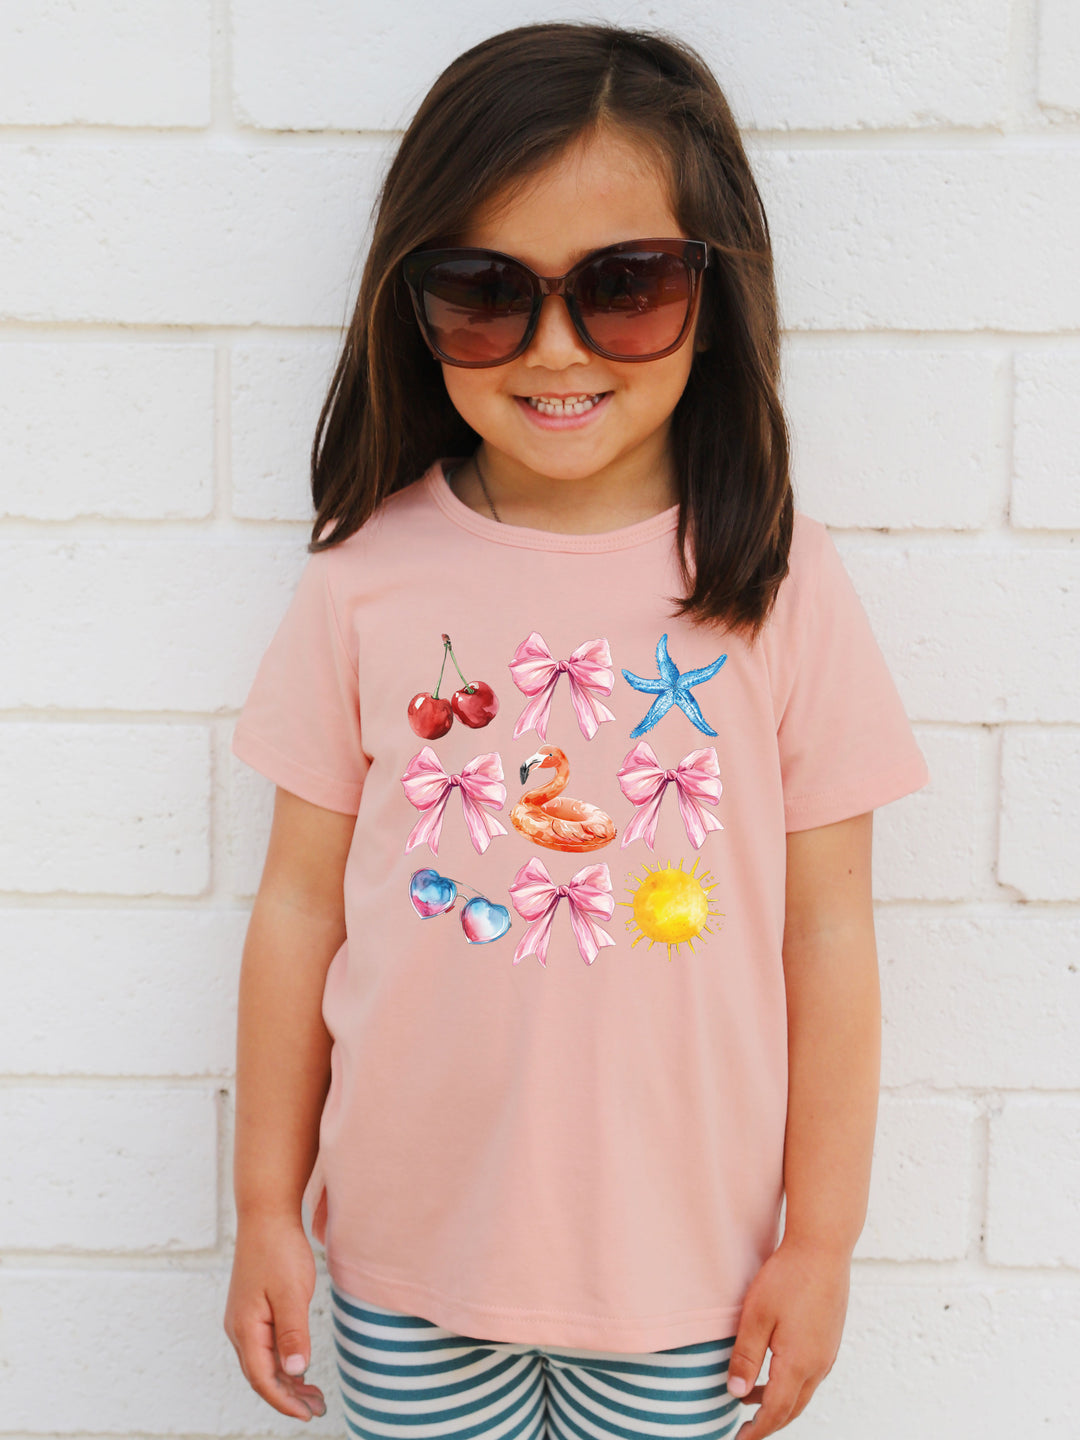 Summer & Bows Kids Graphic Tee